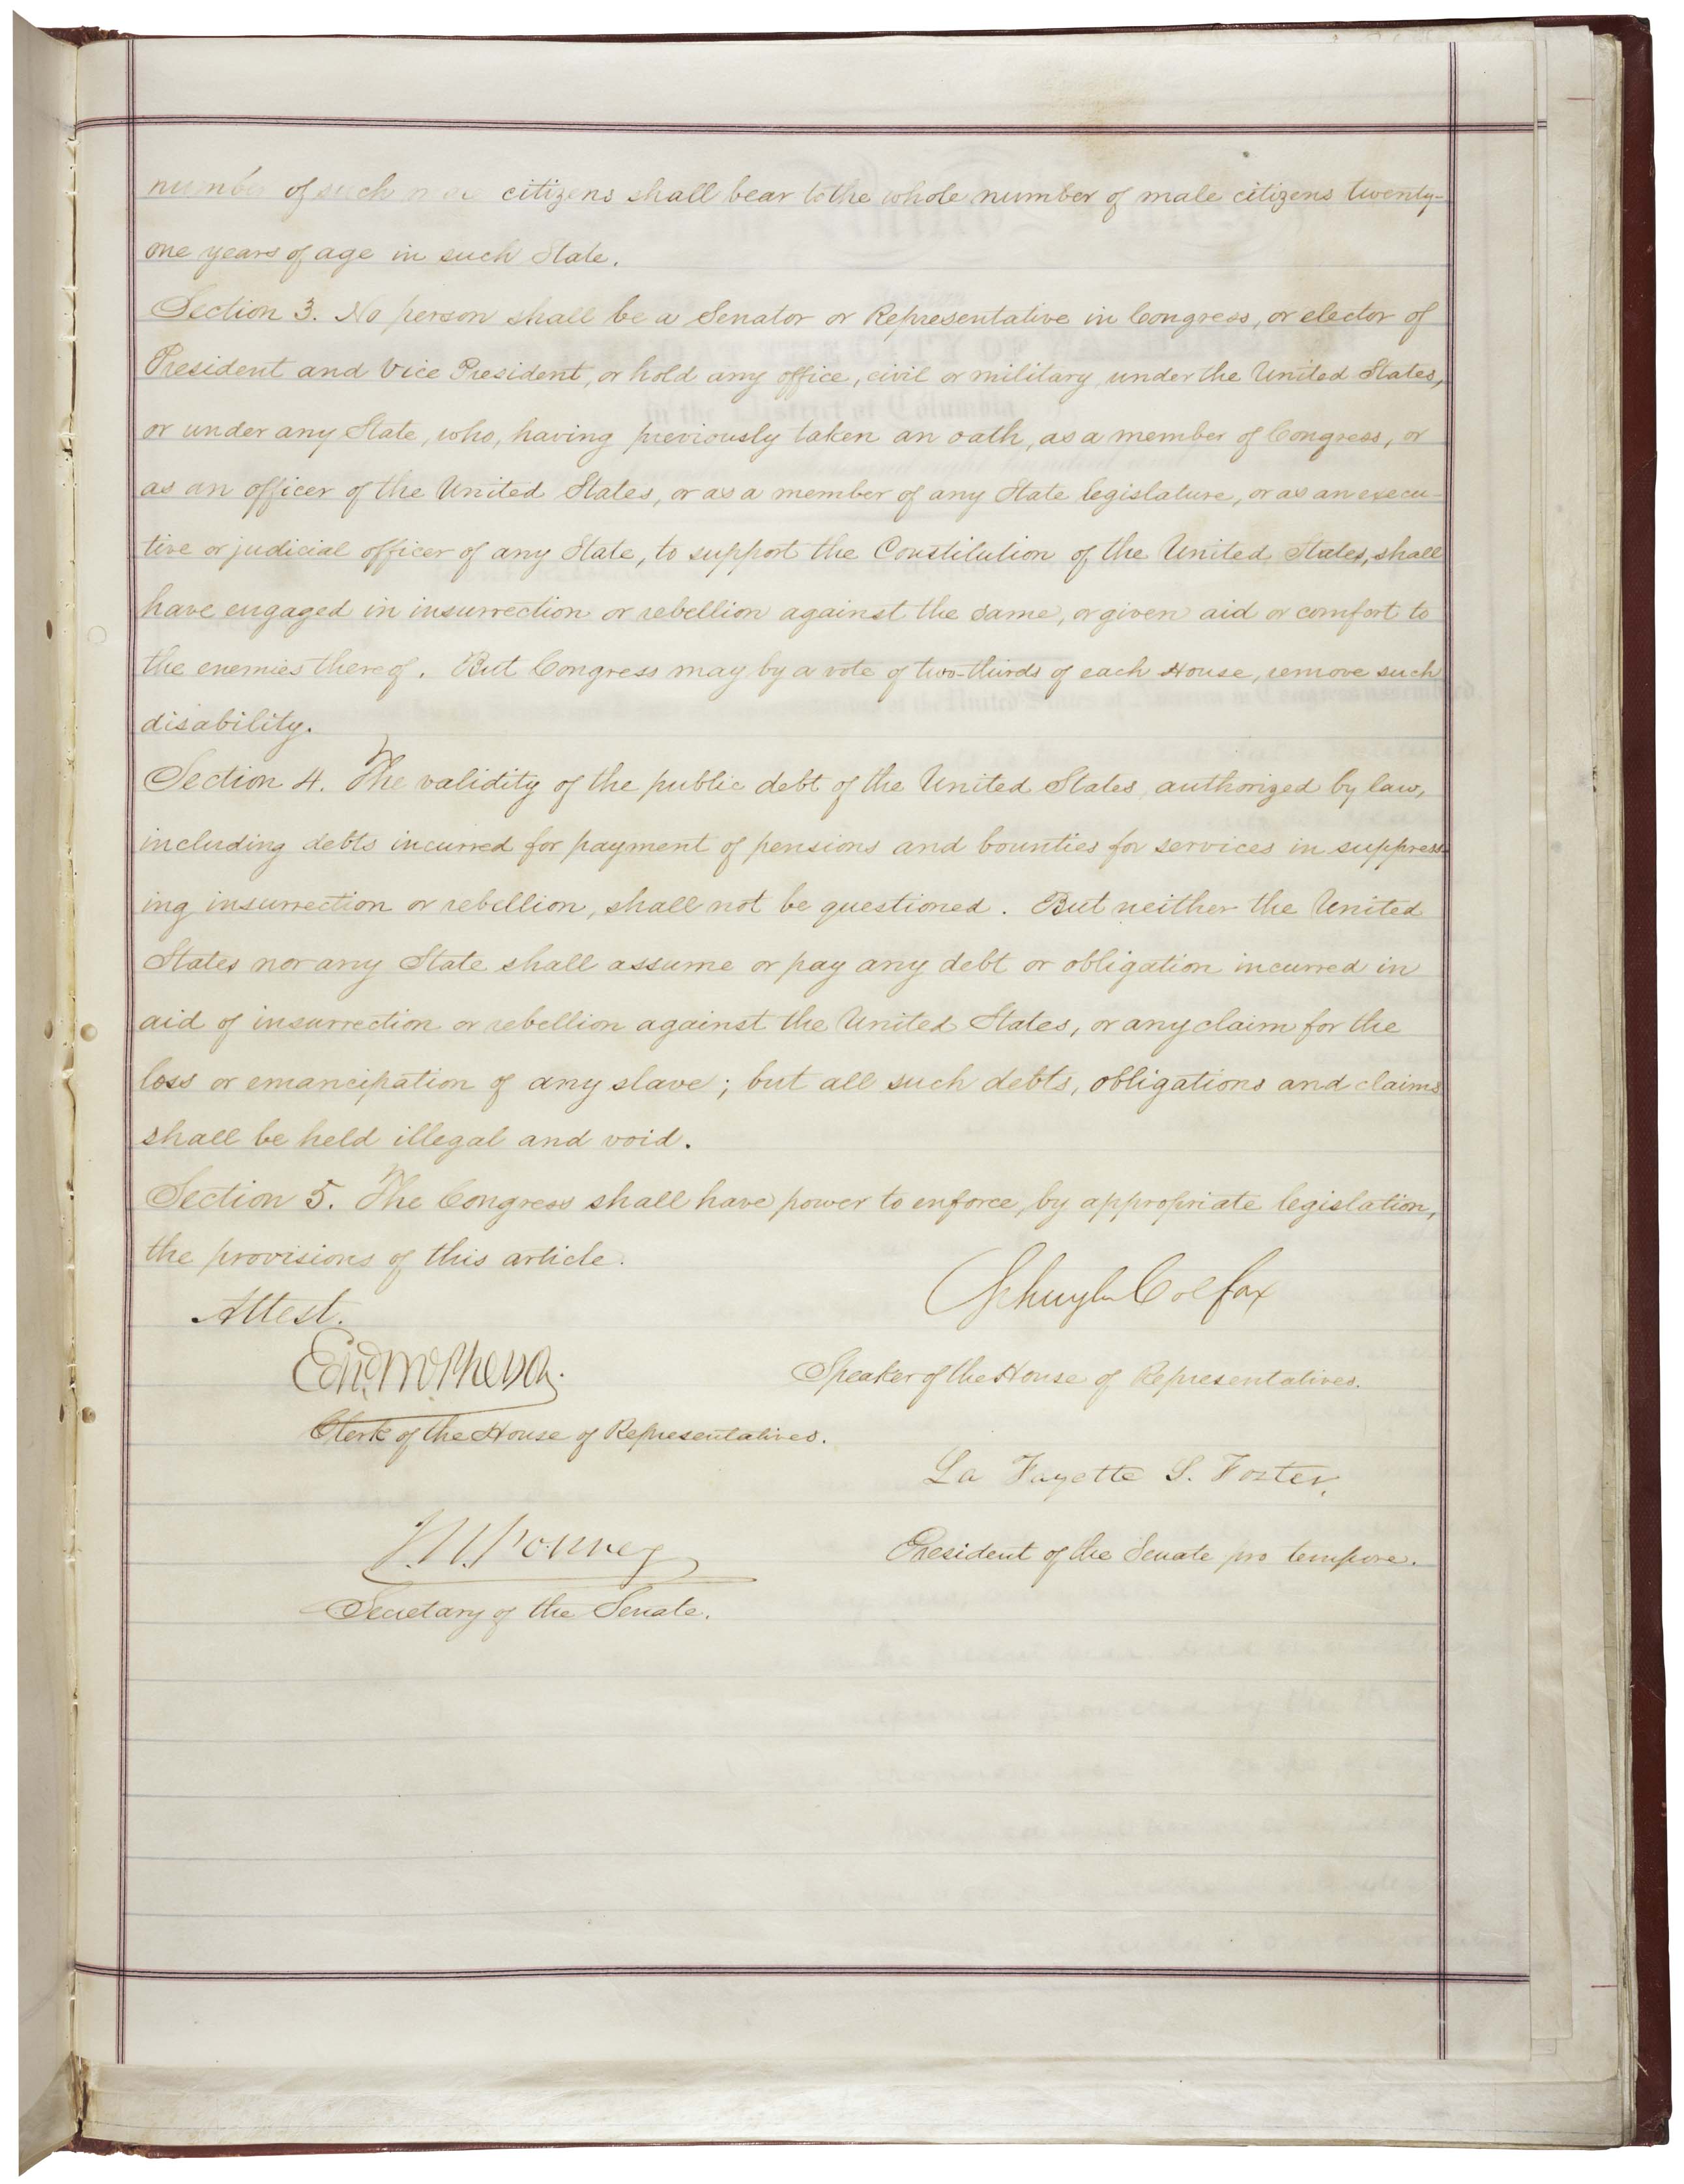 14th Amendment to the US Constitution - Page 2 of 2